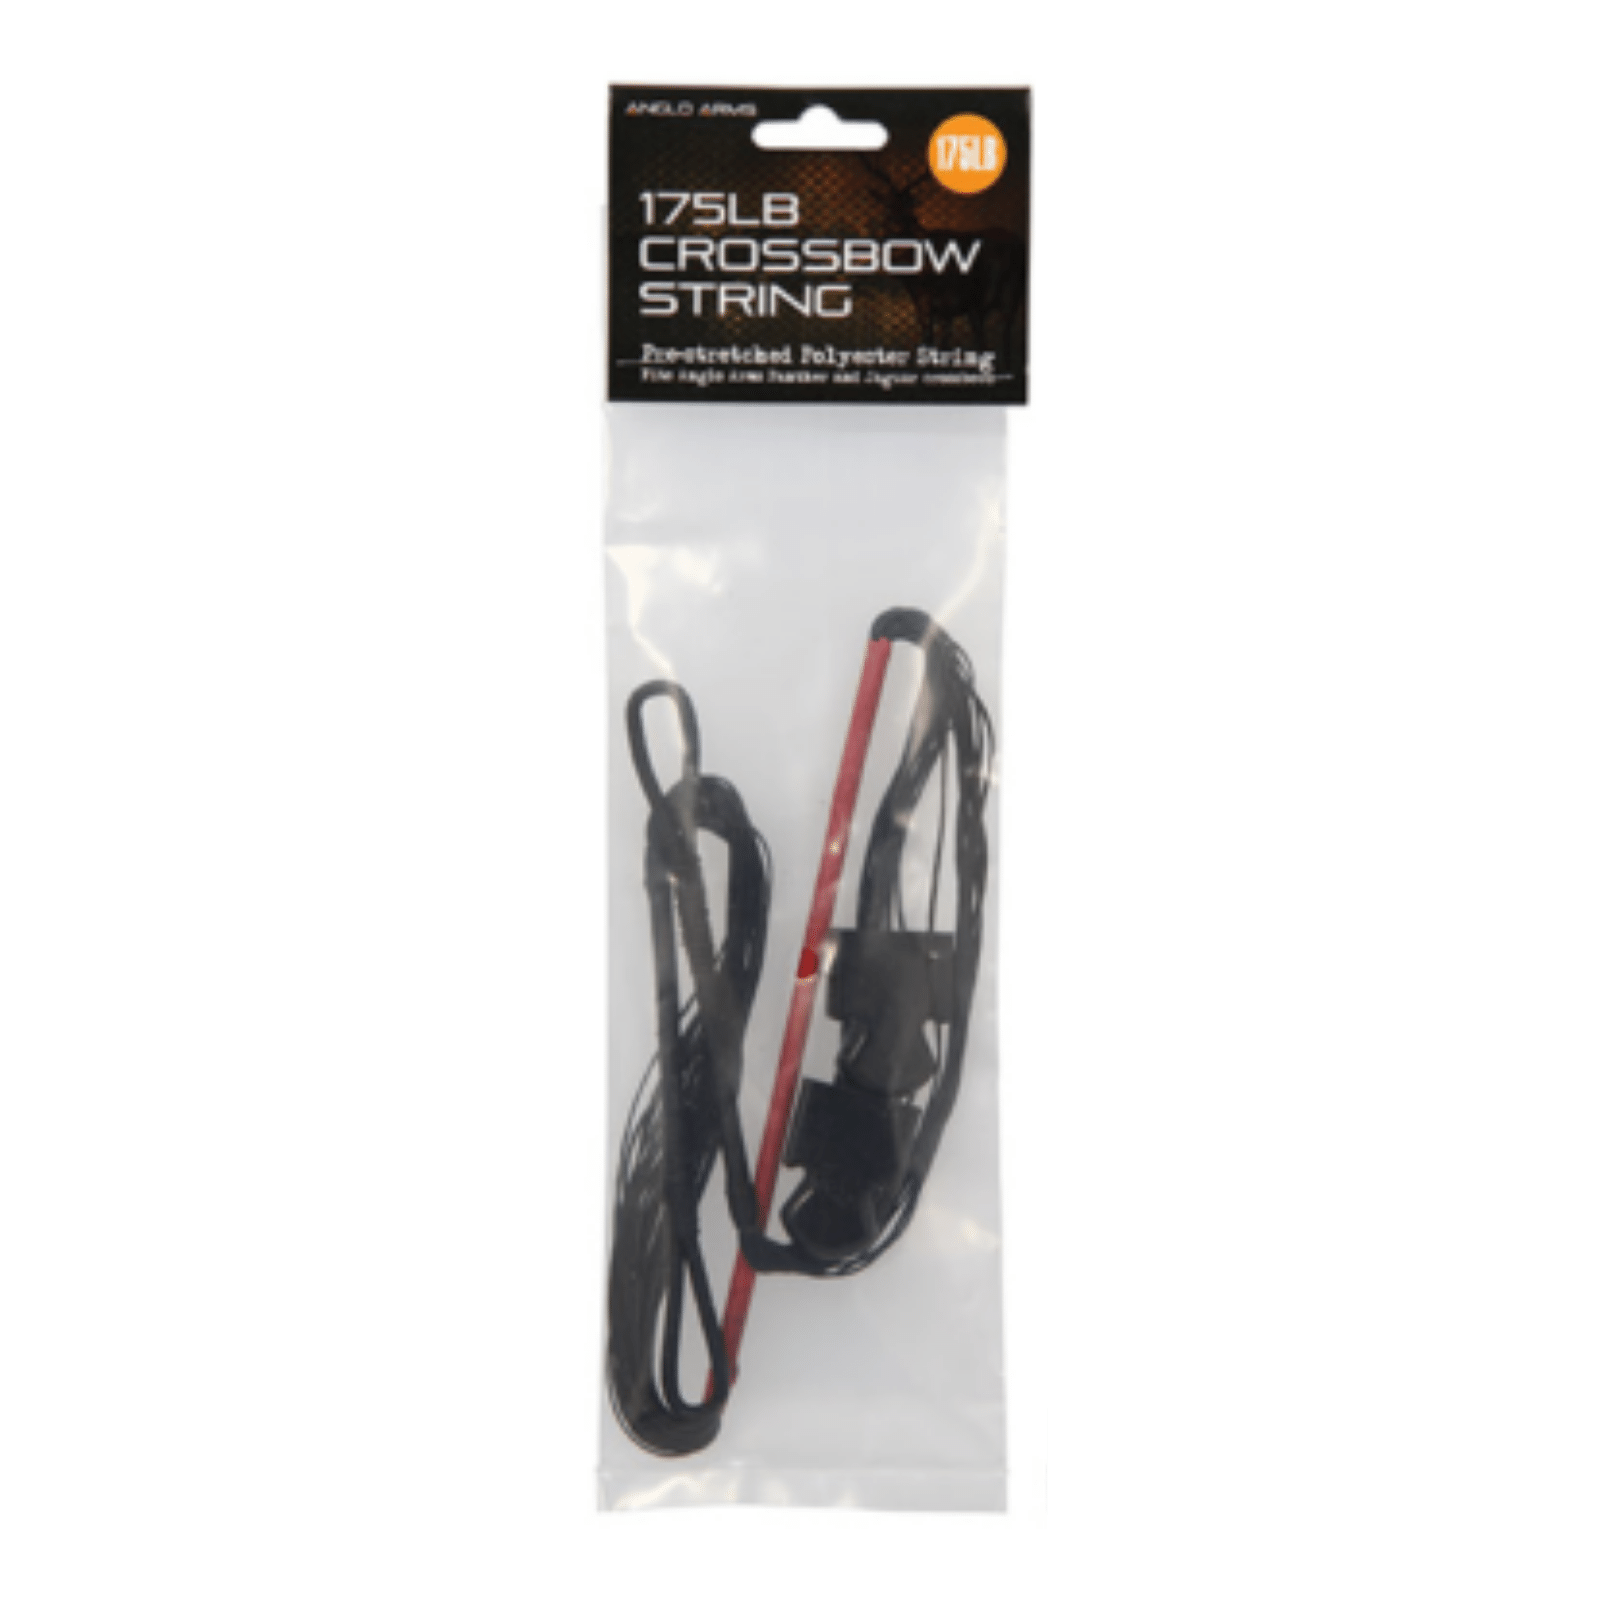 Anglo Arms Crossbow String Replacement - For 175lbs Crossbows